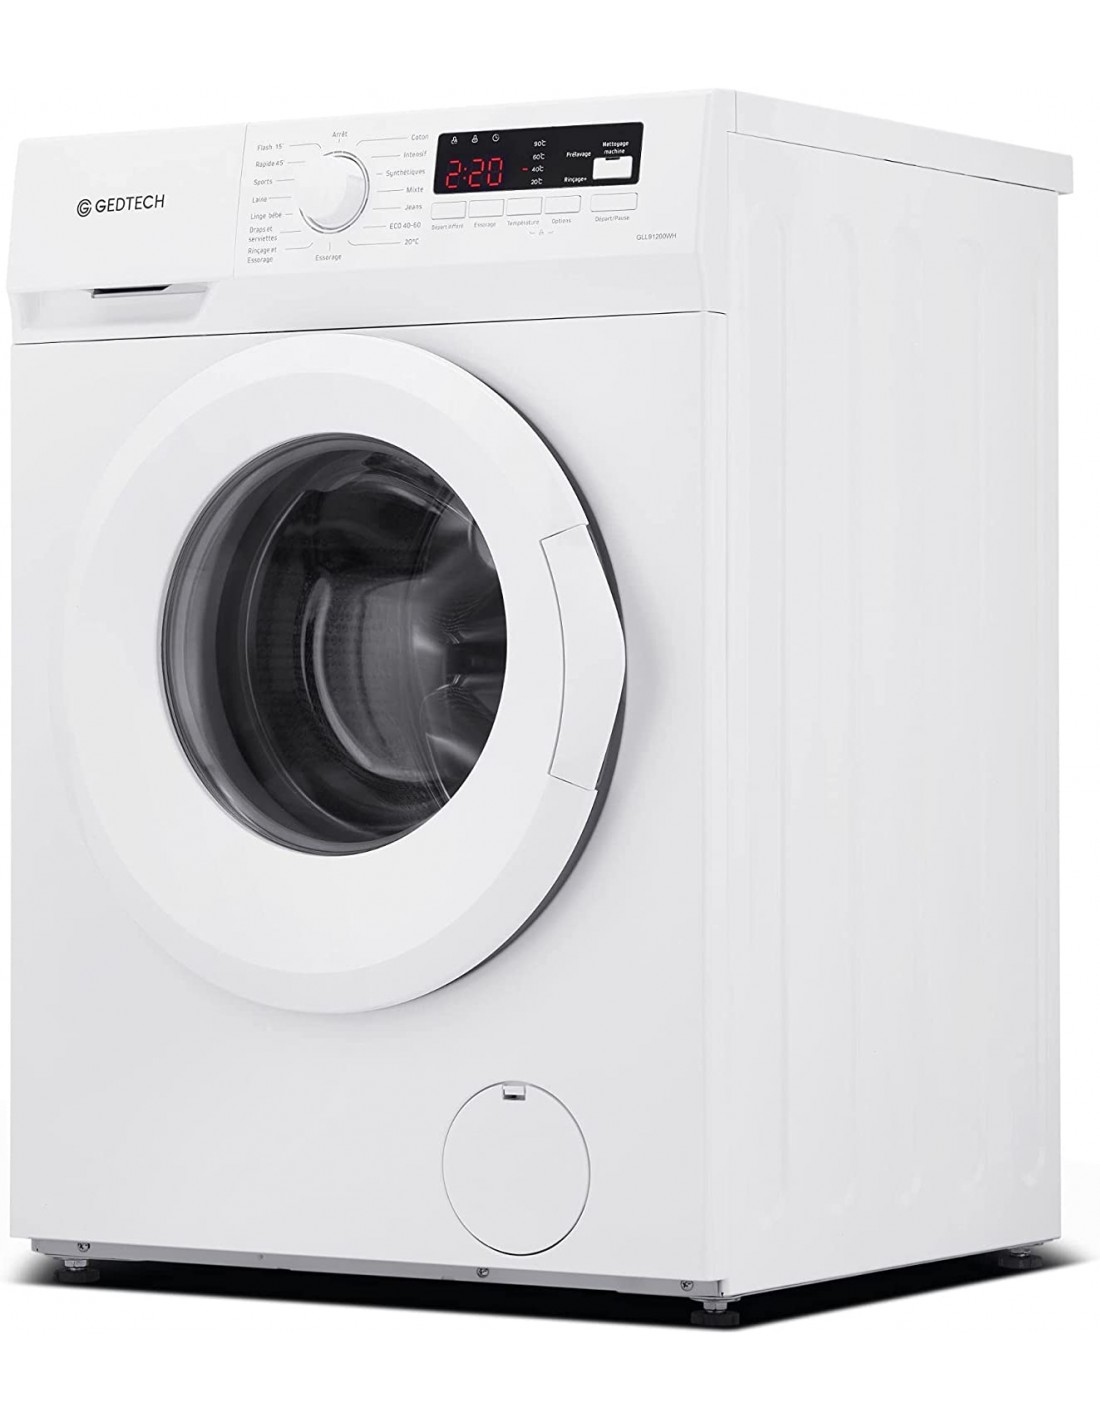 https://www.thebestprice.fr/11471-thickbox_default/gedtech-gll91200wh-lave-linge-frontal-9-kg-1200-trs-e.jpg